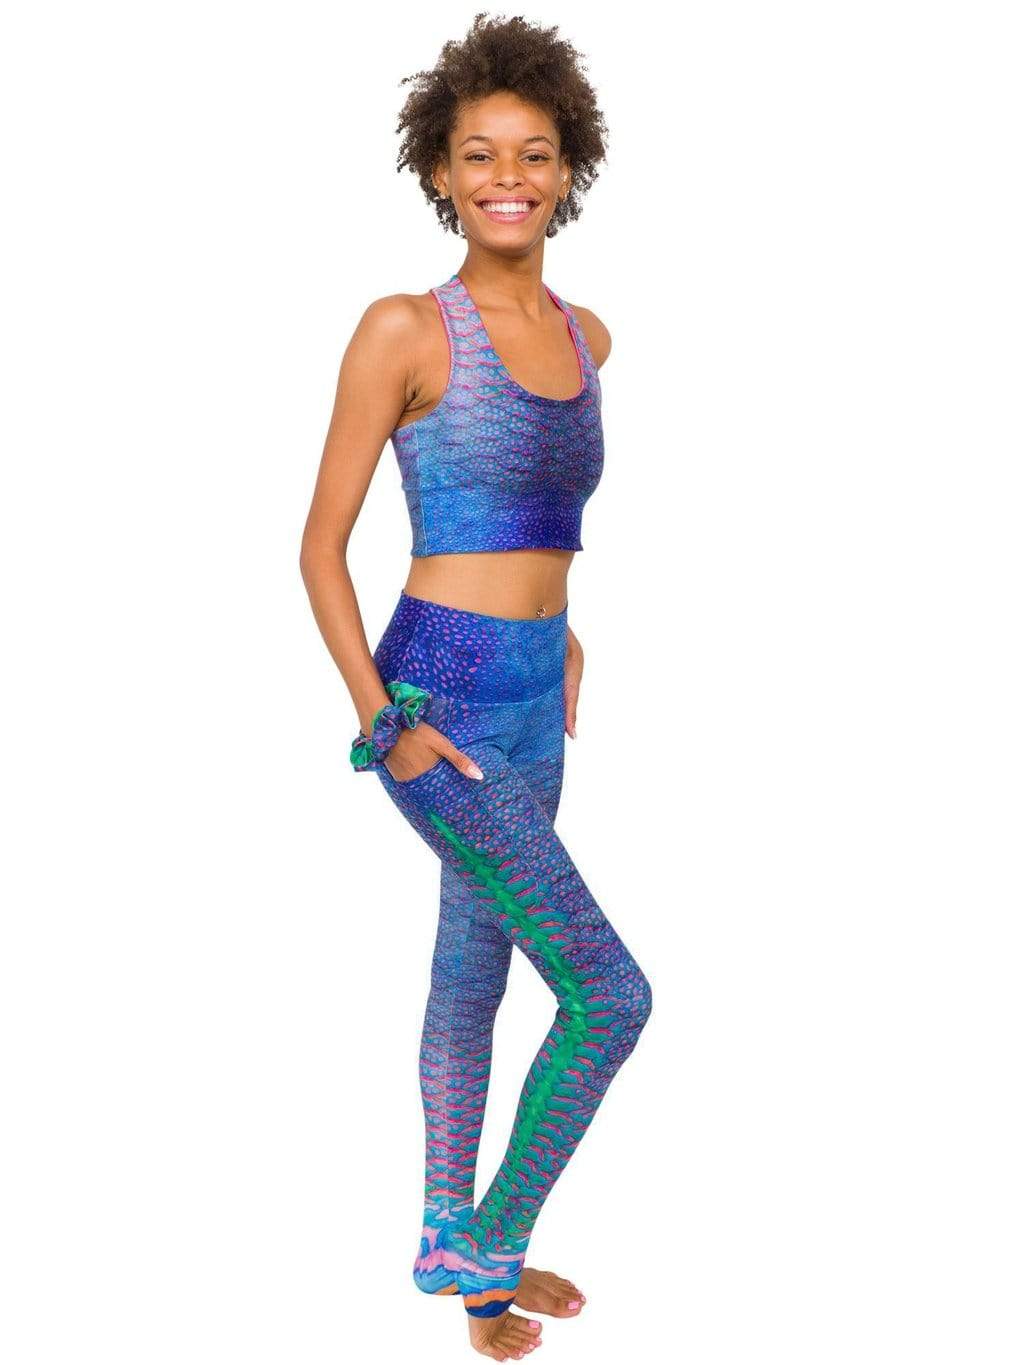 Model: Syriah is a sea turtle conservation biologist. She is 5&#39;7&quot;, 111 lbs and is wearing a size XS top and legging.